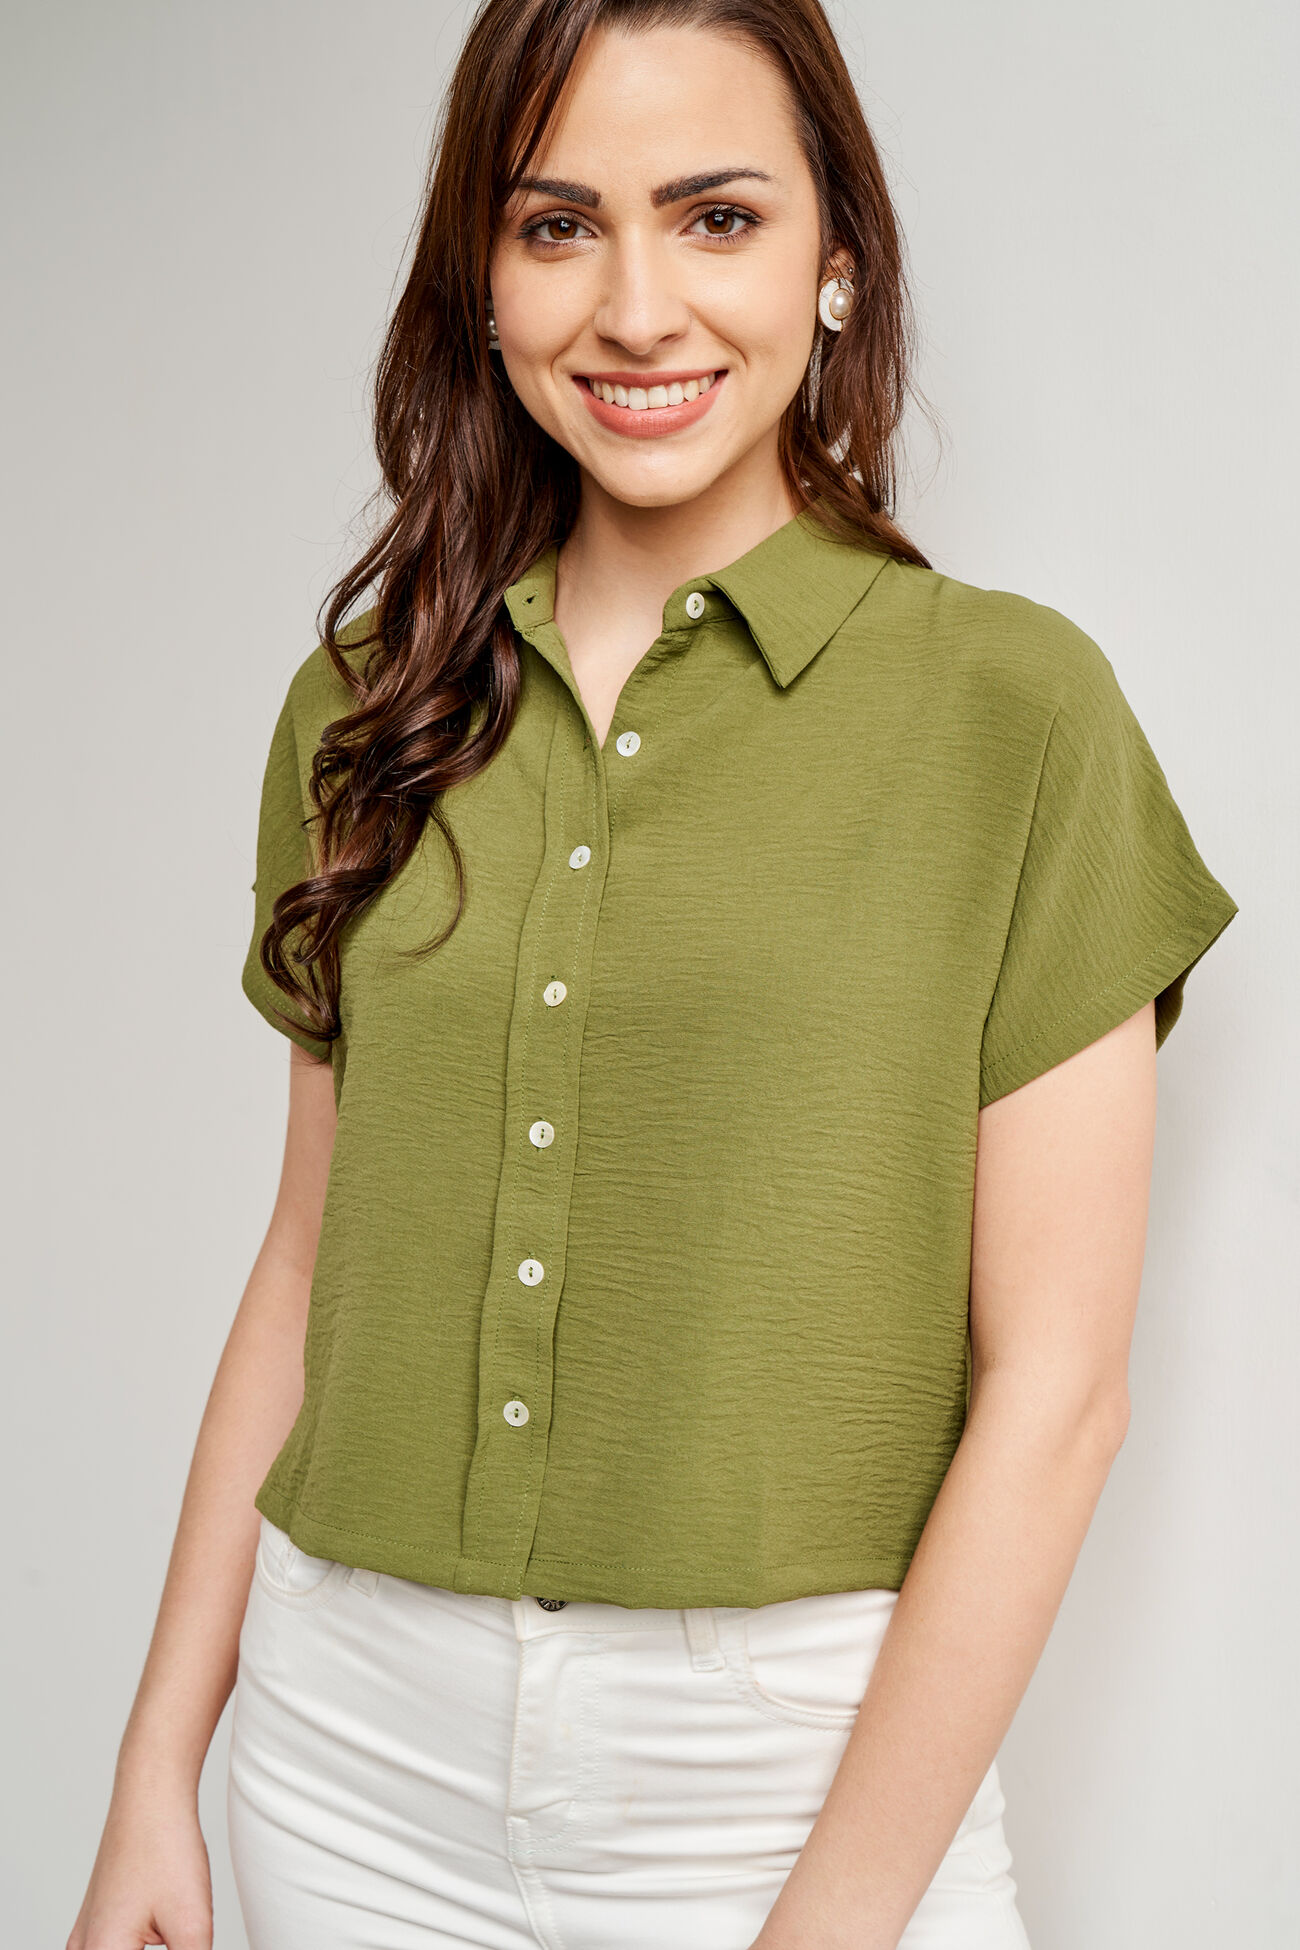 Olive Loose Fit Shirt Style Top, Olive, image 3